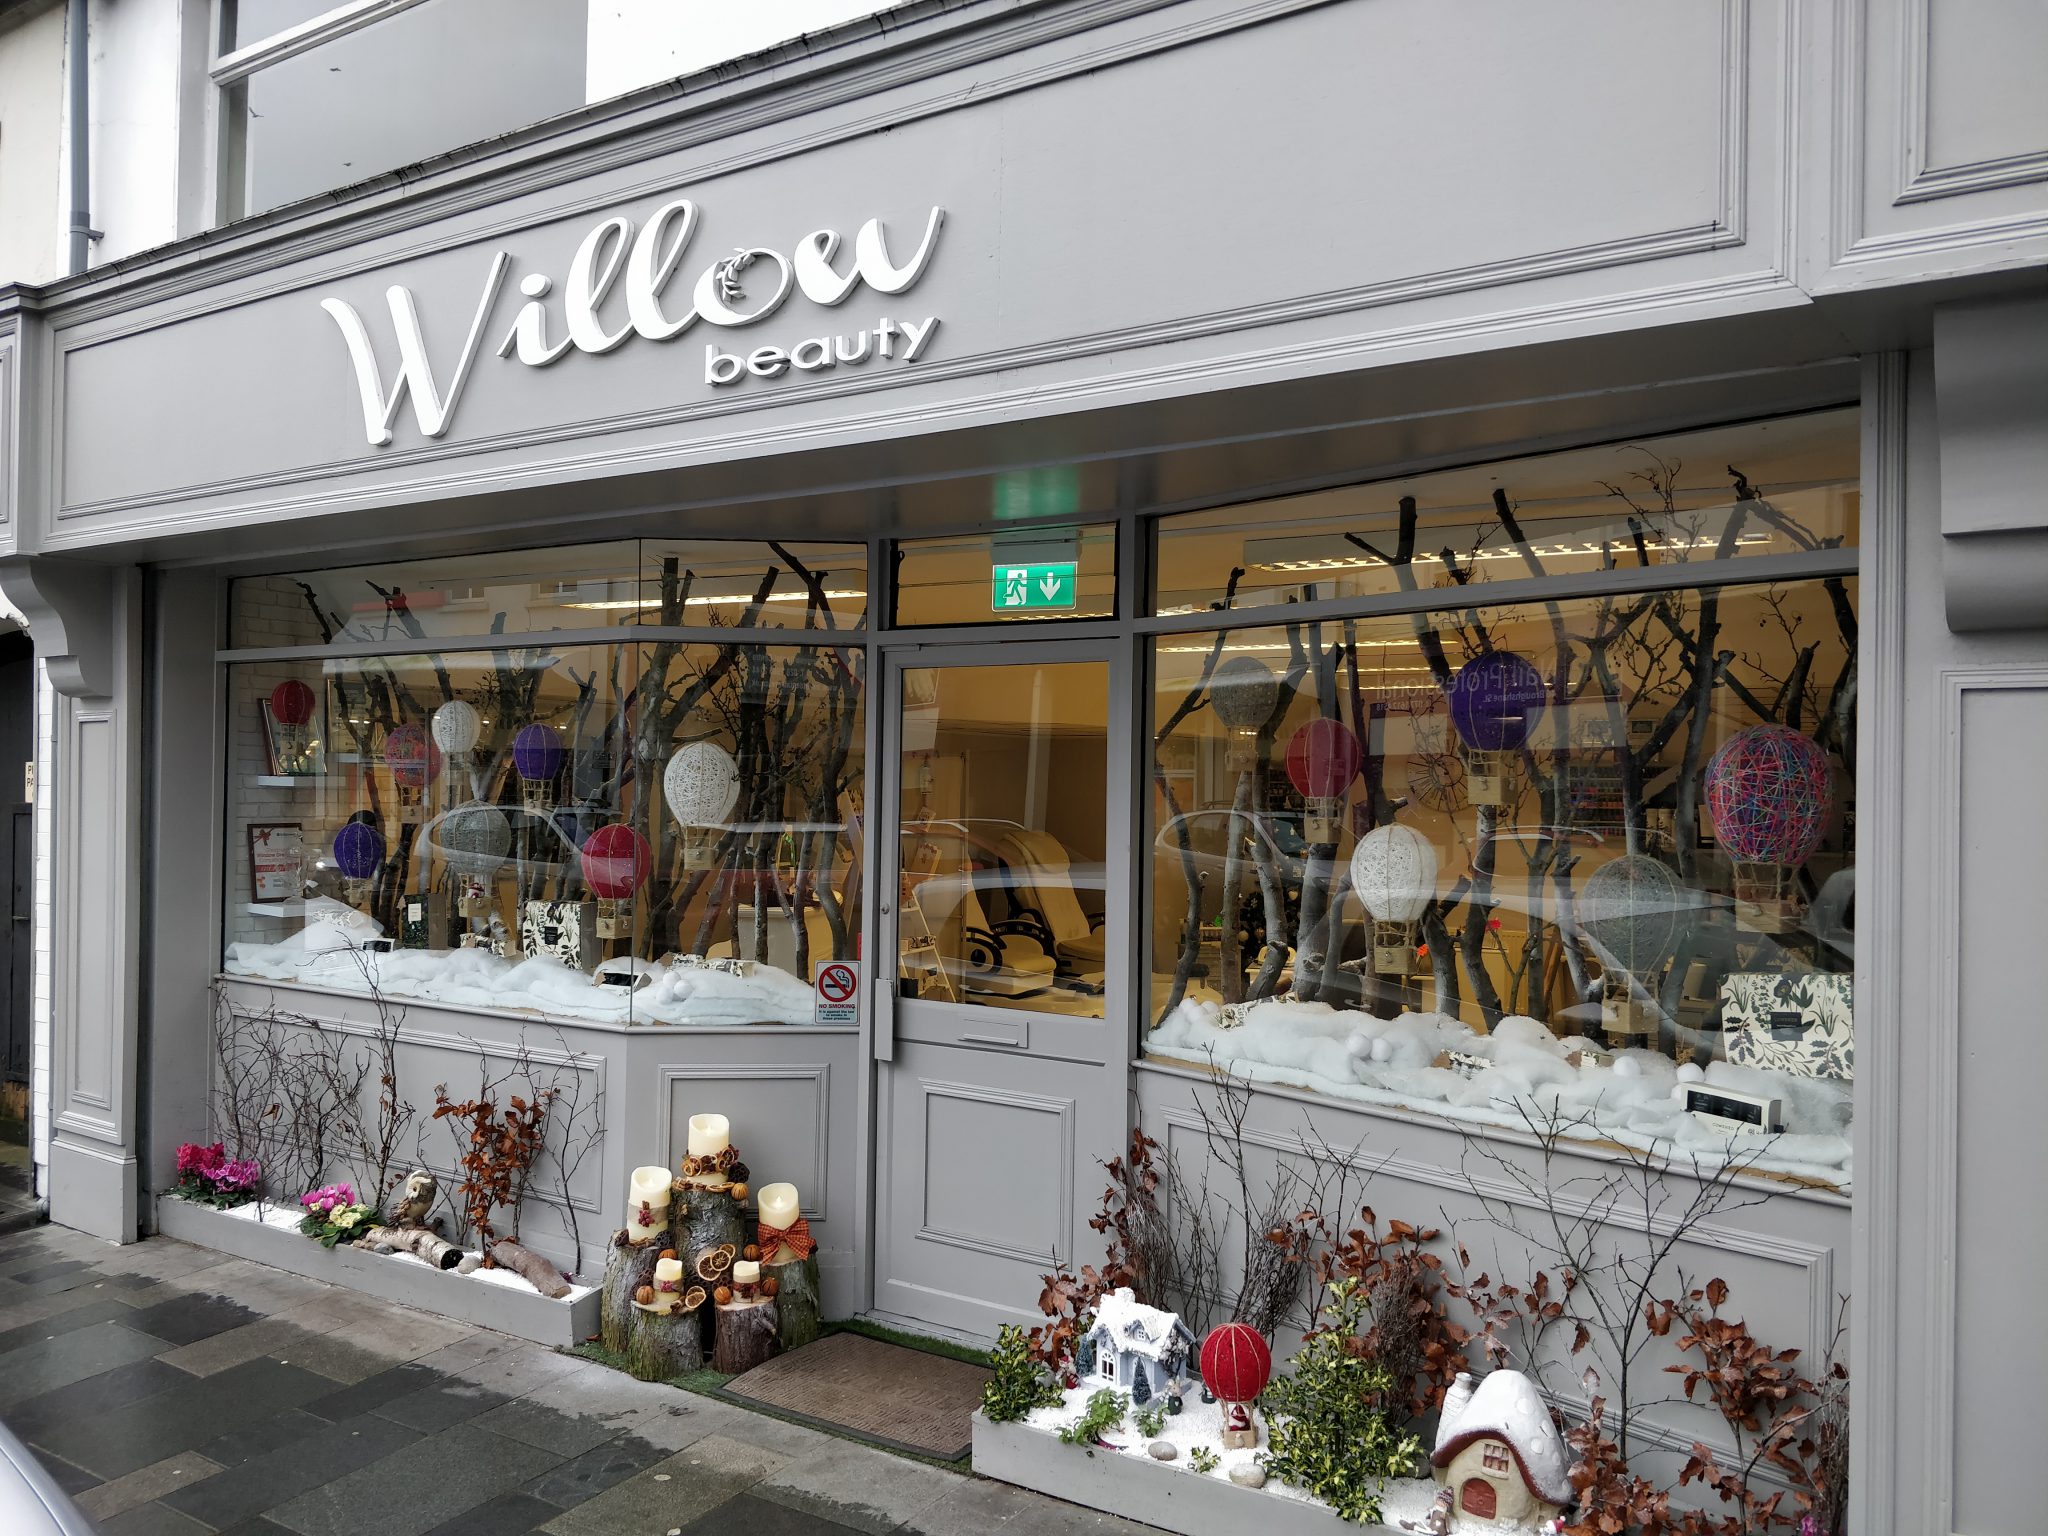 Willow Beauty – award-winning beauty salon and Cash For Kids drop off point